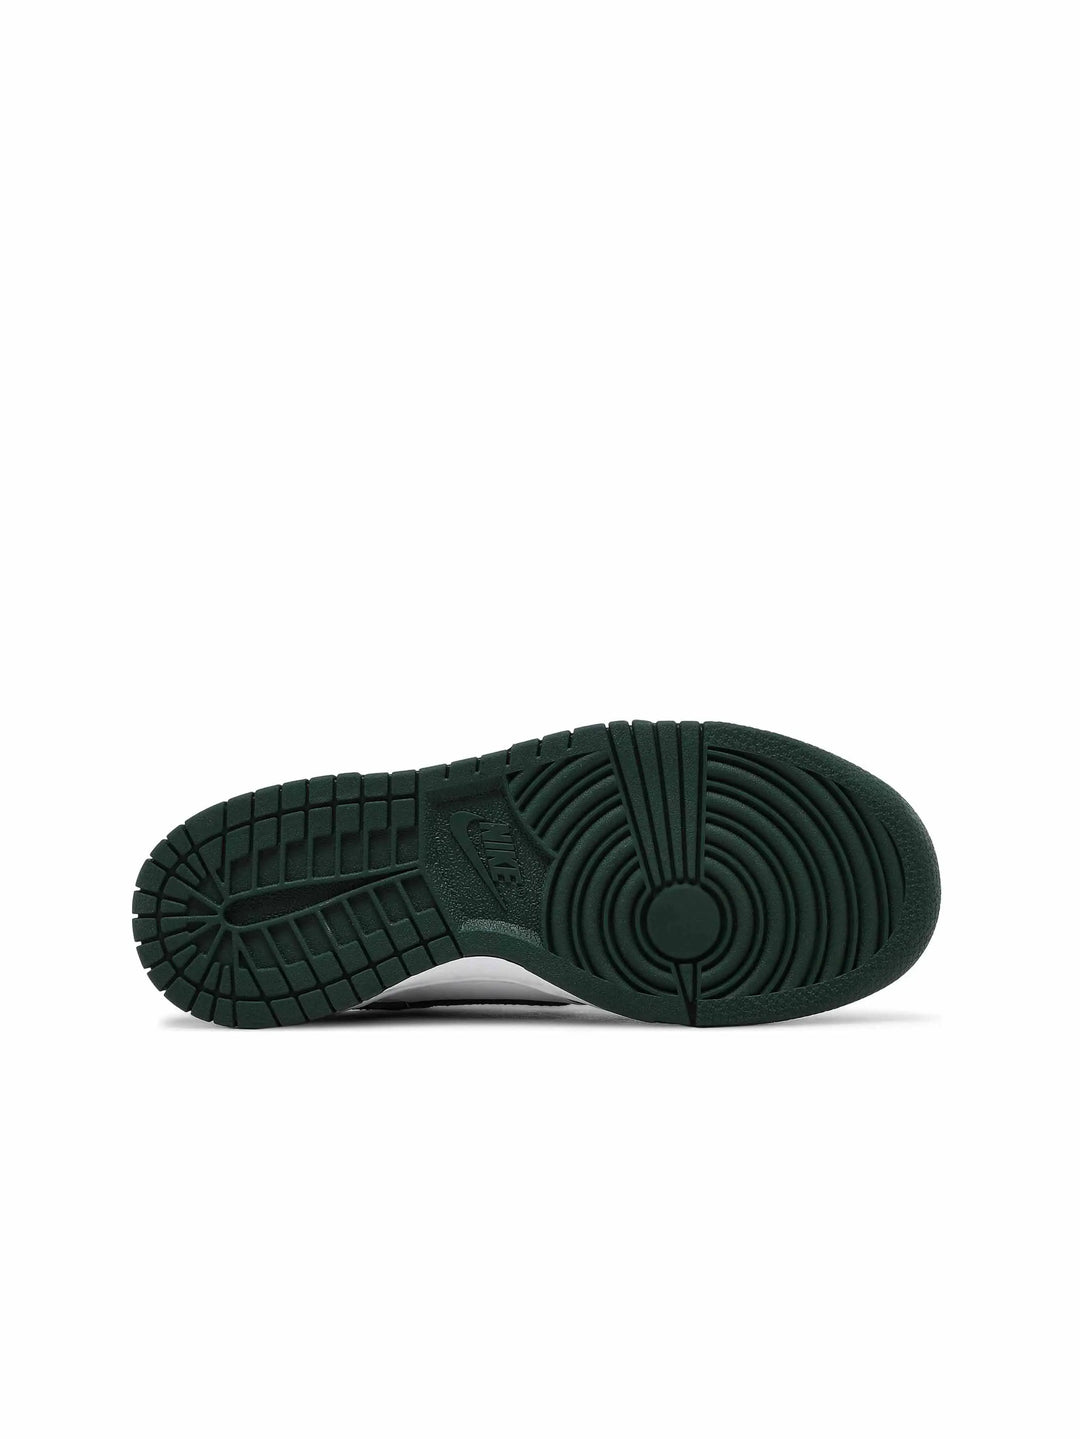 Nike Dunk Low Michigan State (GS) in Auckland, New Zealand - Shop name